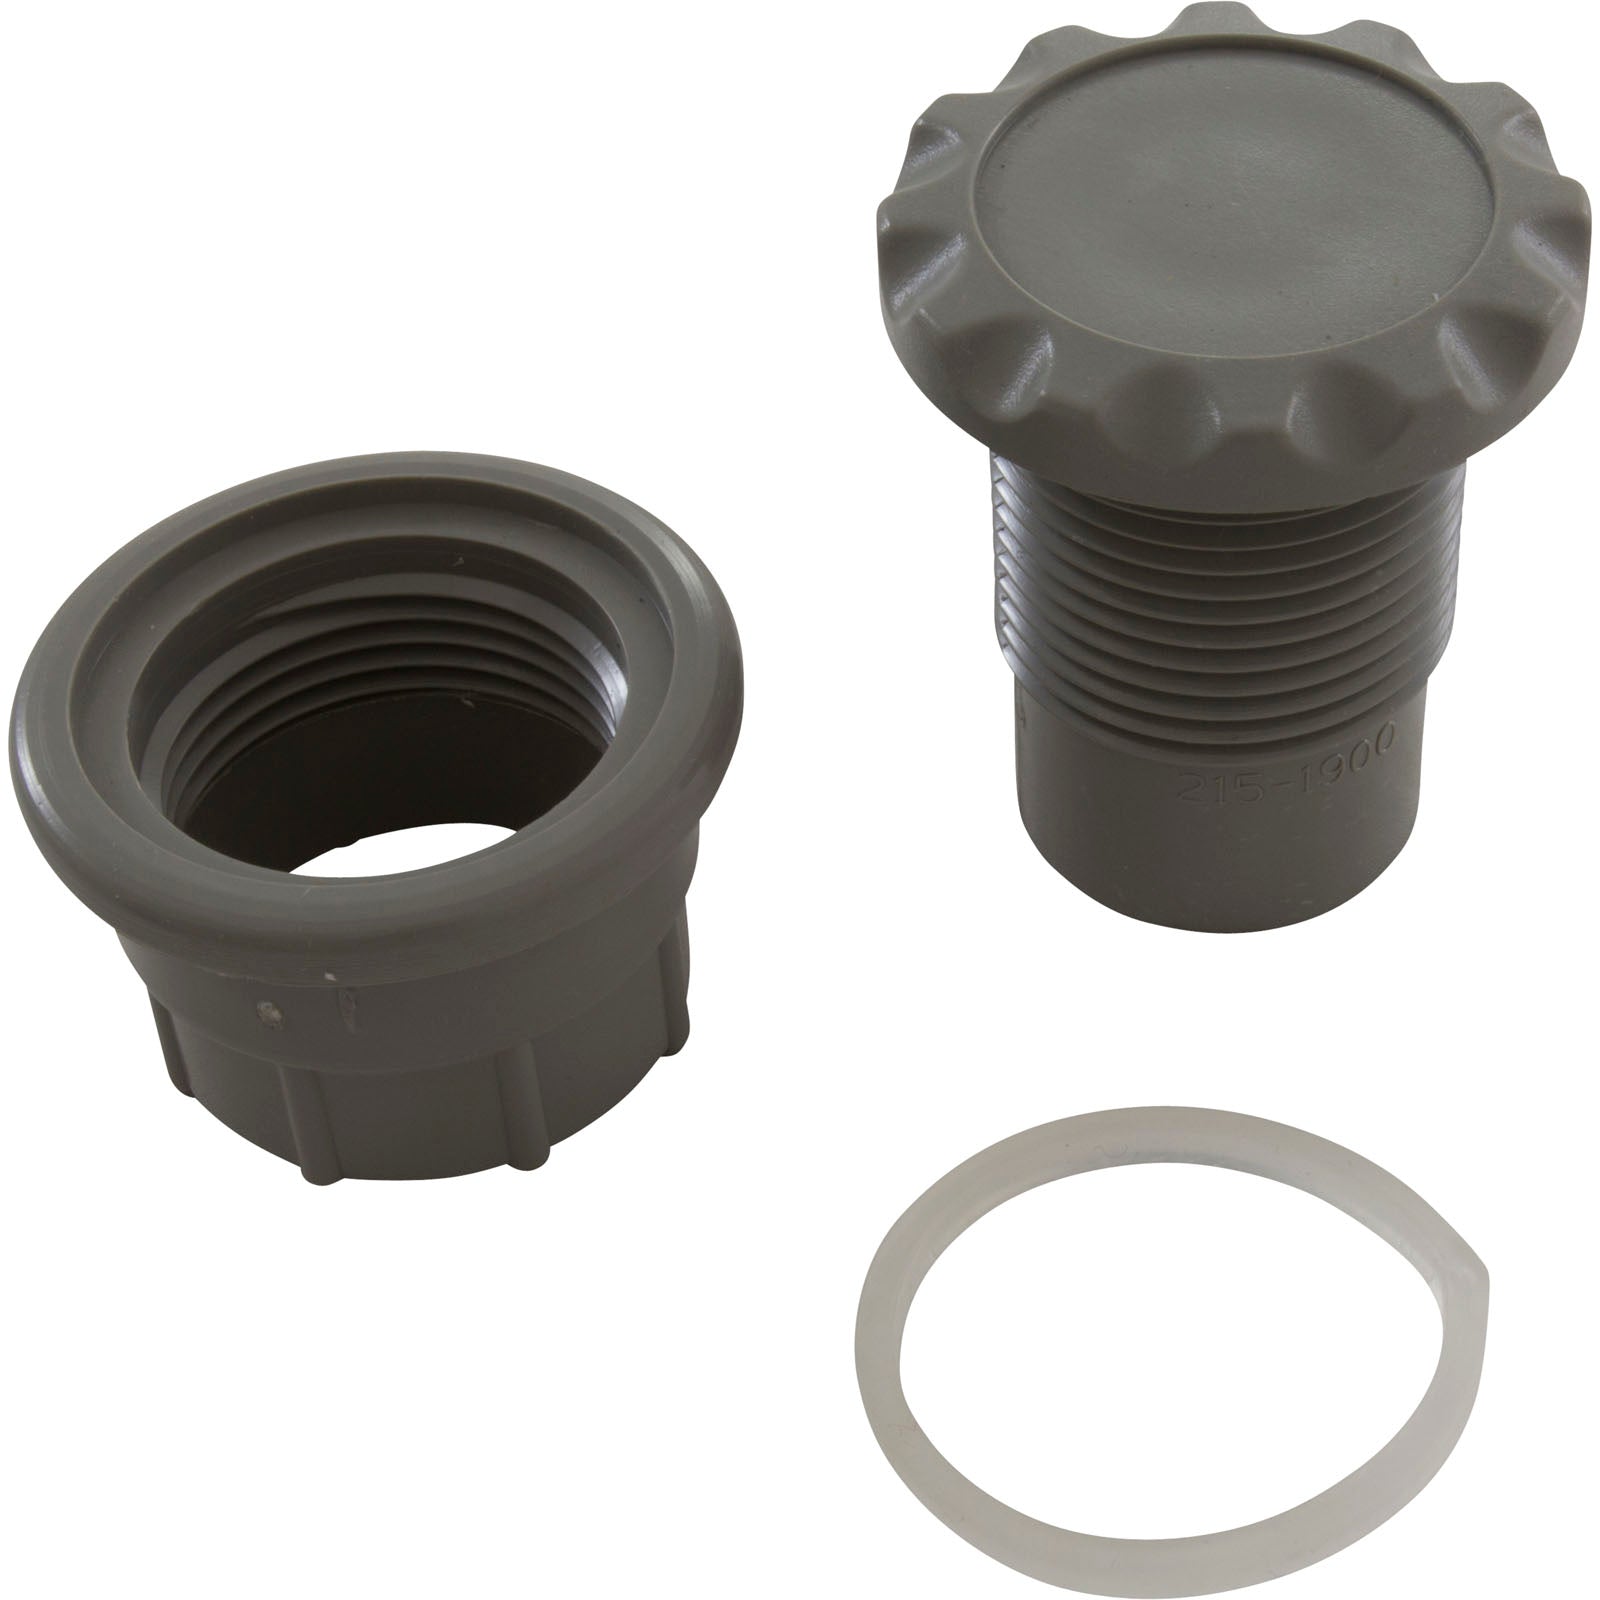 Waterway Gunite Air Control "A" Style (Fits Inside 1 1/2" Pipe Or 1/2" Slip) [Gray] (660-3407)